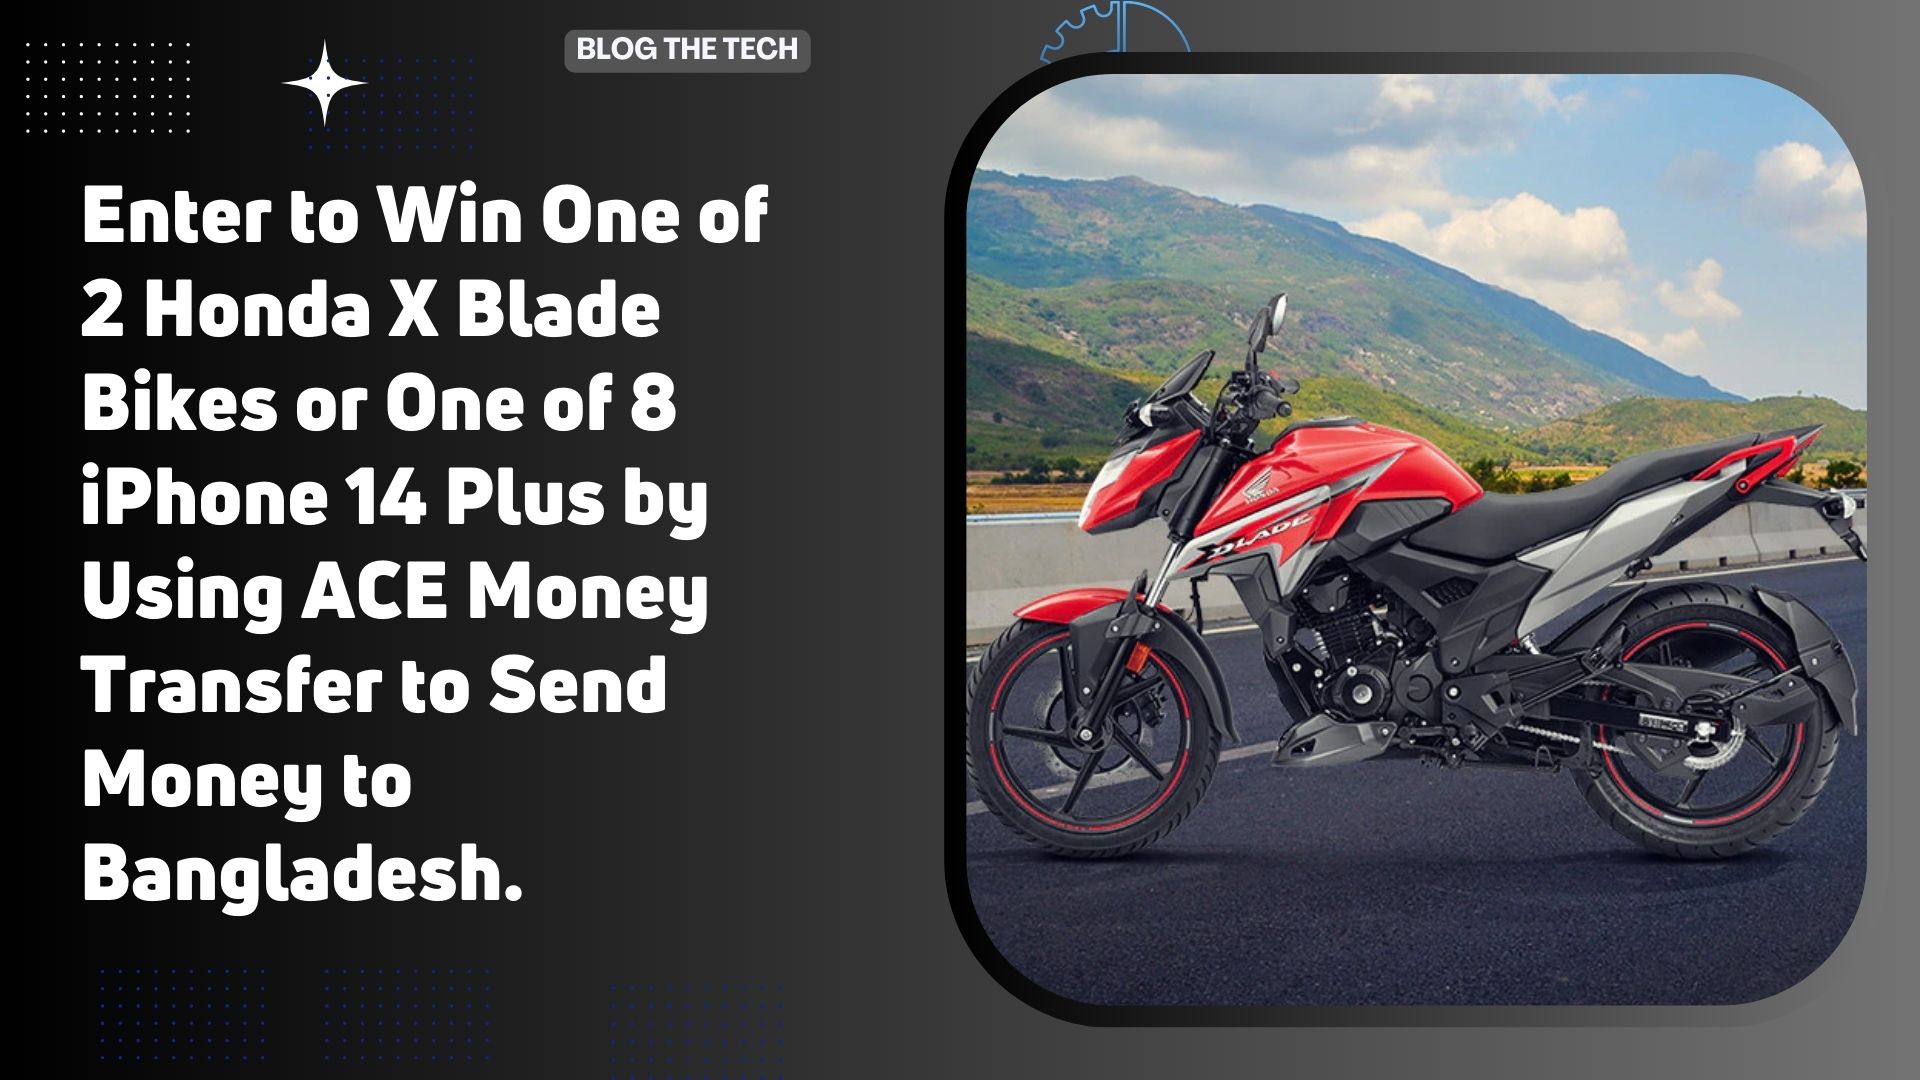 Enter to Win One of 2 Honda X Blade Bikes or One of 8 iPhone 14 Plus by Using ACE Money Transfer to Send Money to Bangladesh